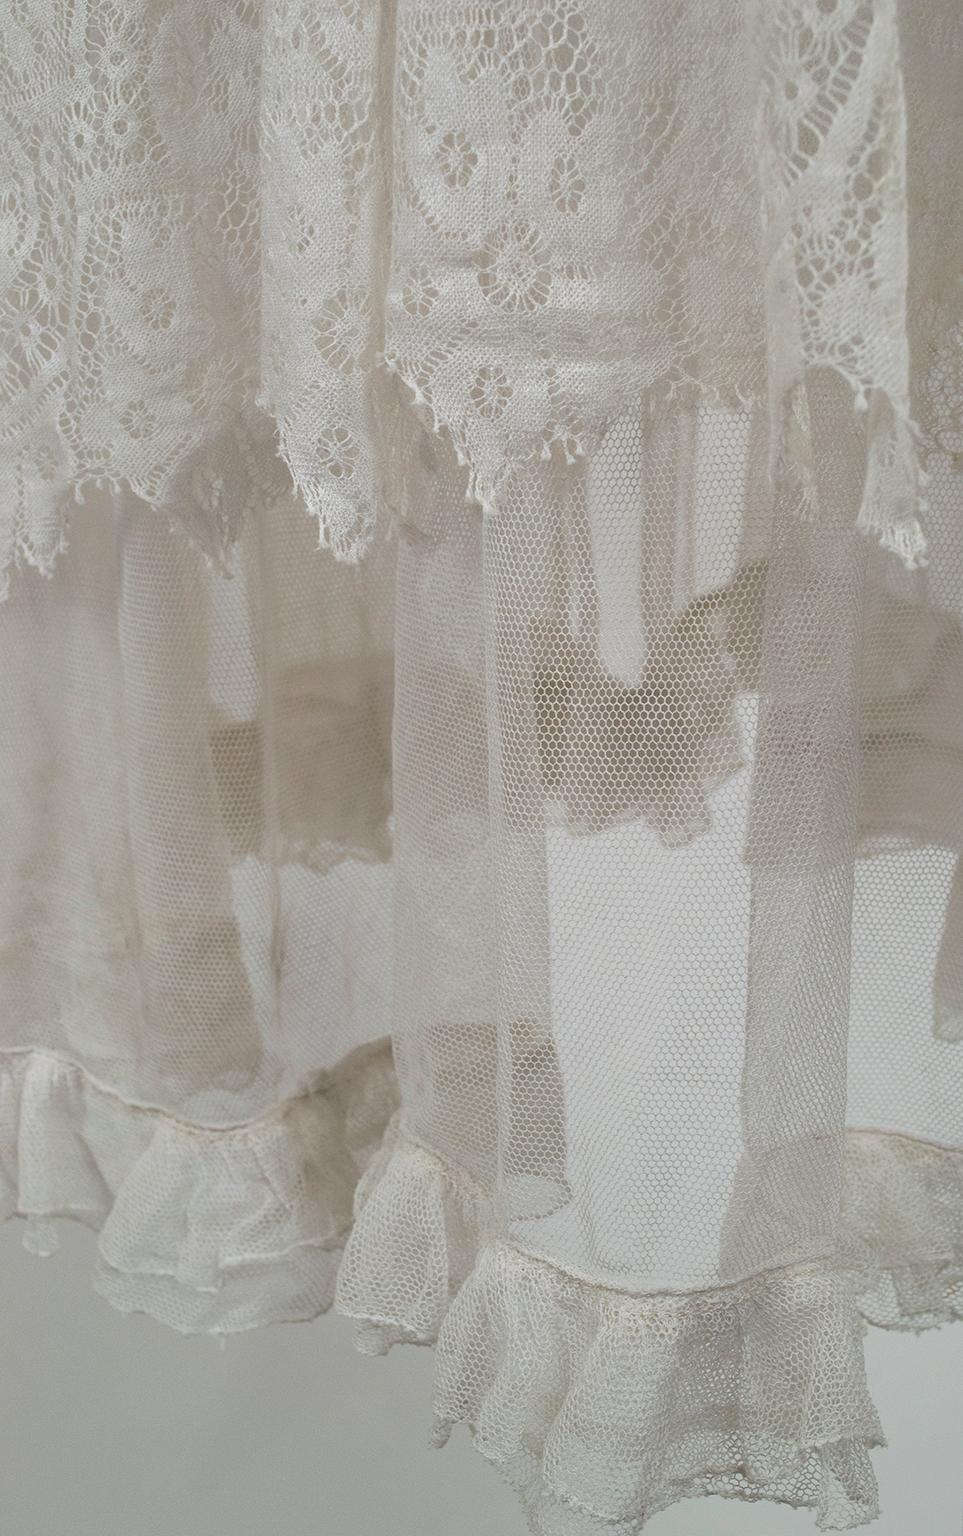 White Edwardian Net Rosebud Afternoon Tea or Bridal Gown - XXS, Early 1900s For Sale 10